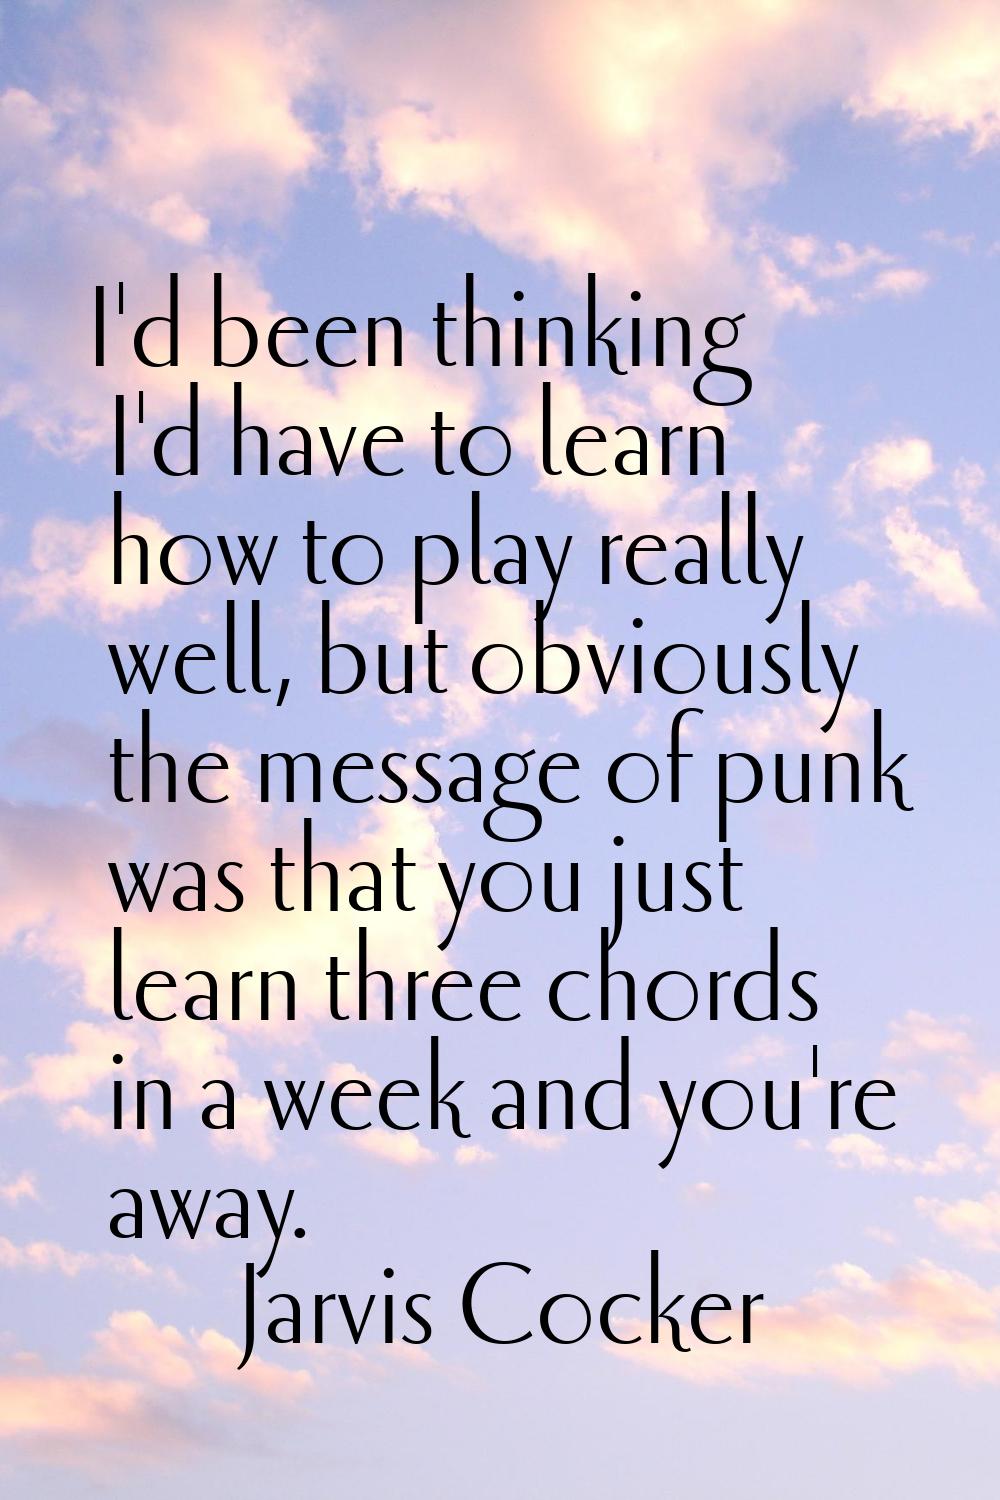 I'd been thinking I'd have to learn how to play really well, but obviously the message of punk was 